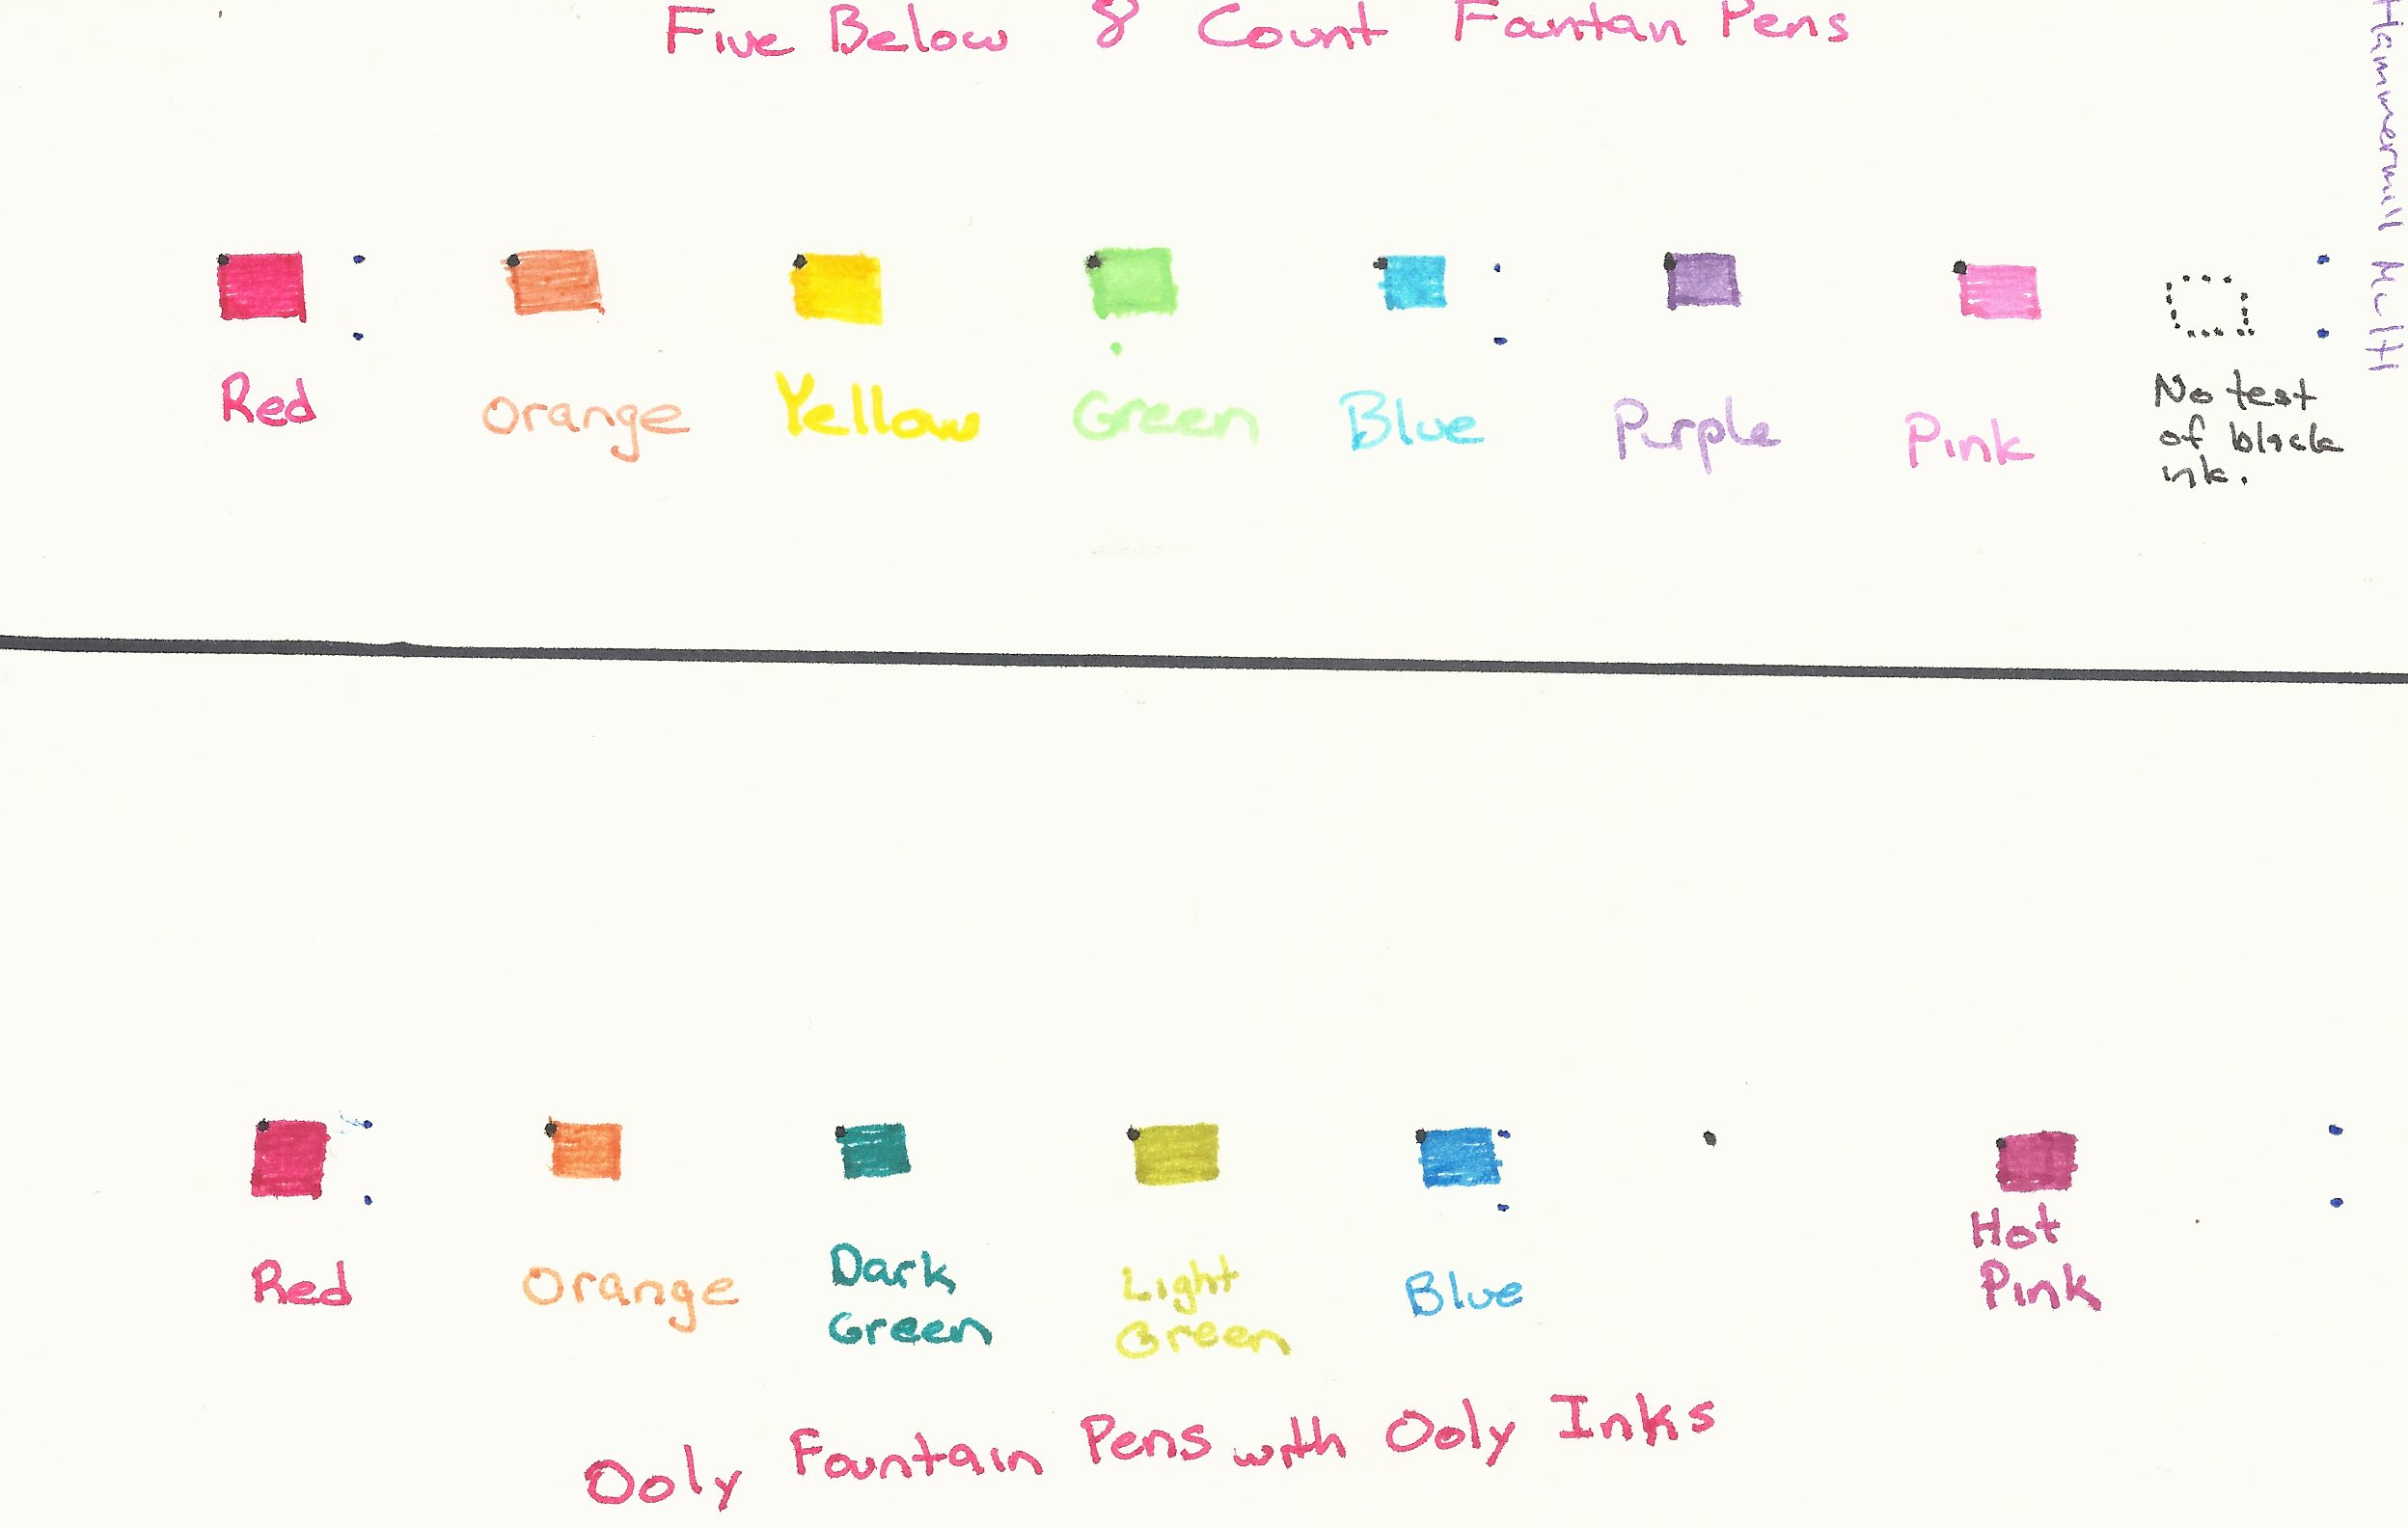 How to use your OOLY Fountain Pen 